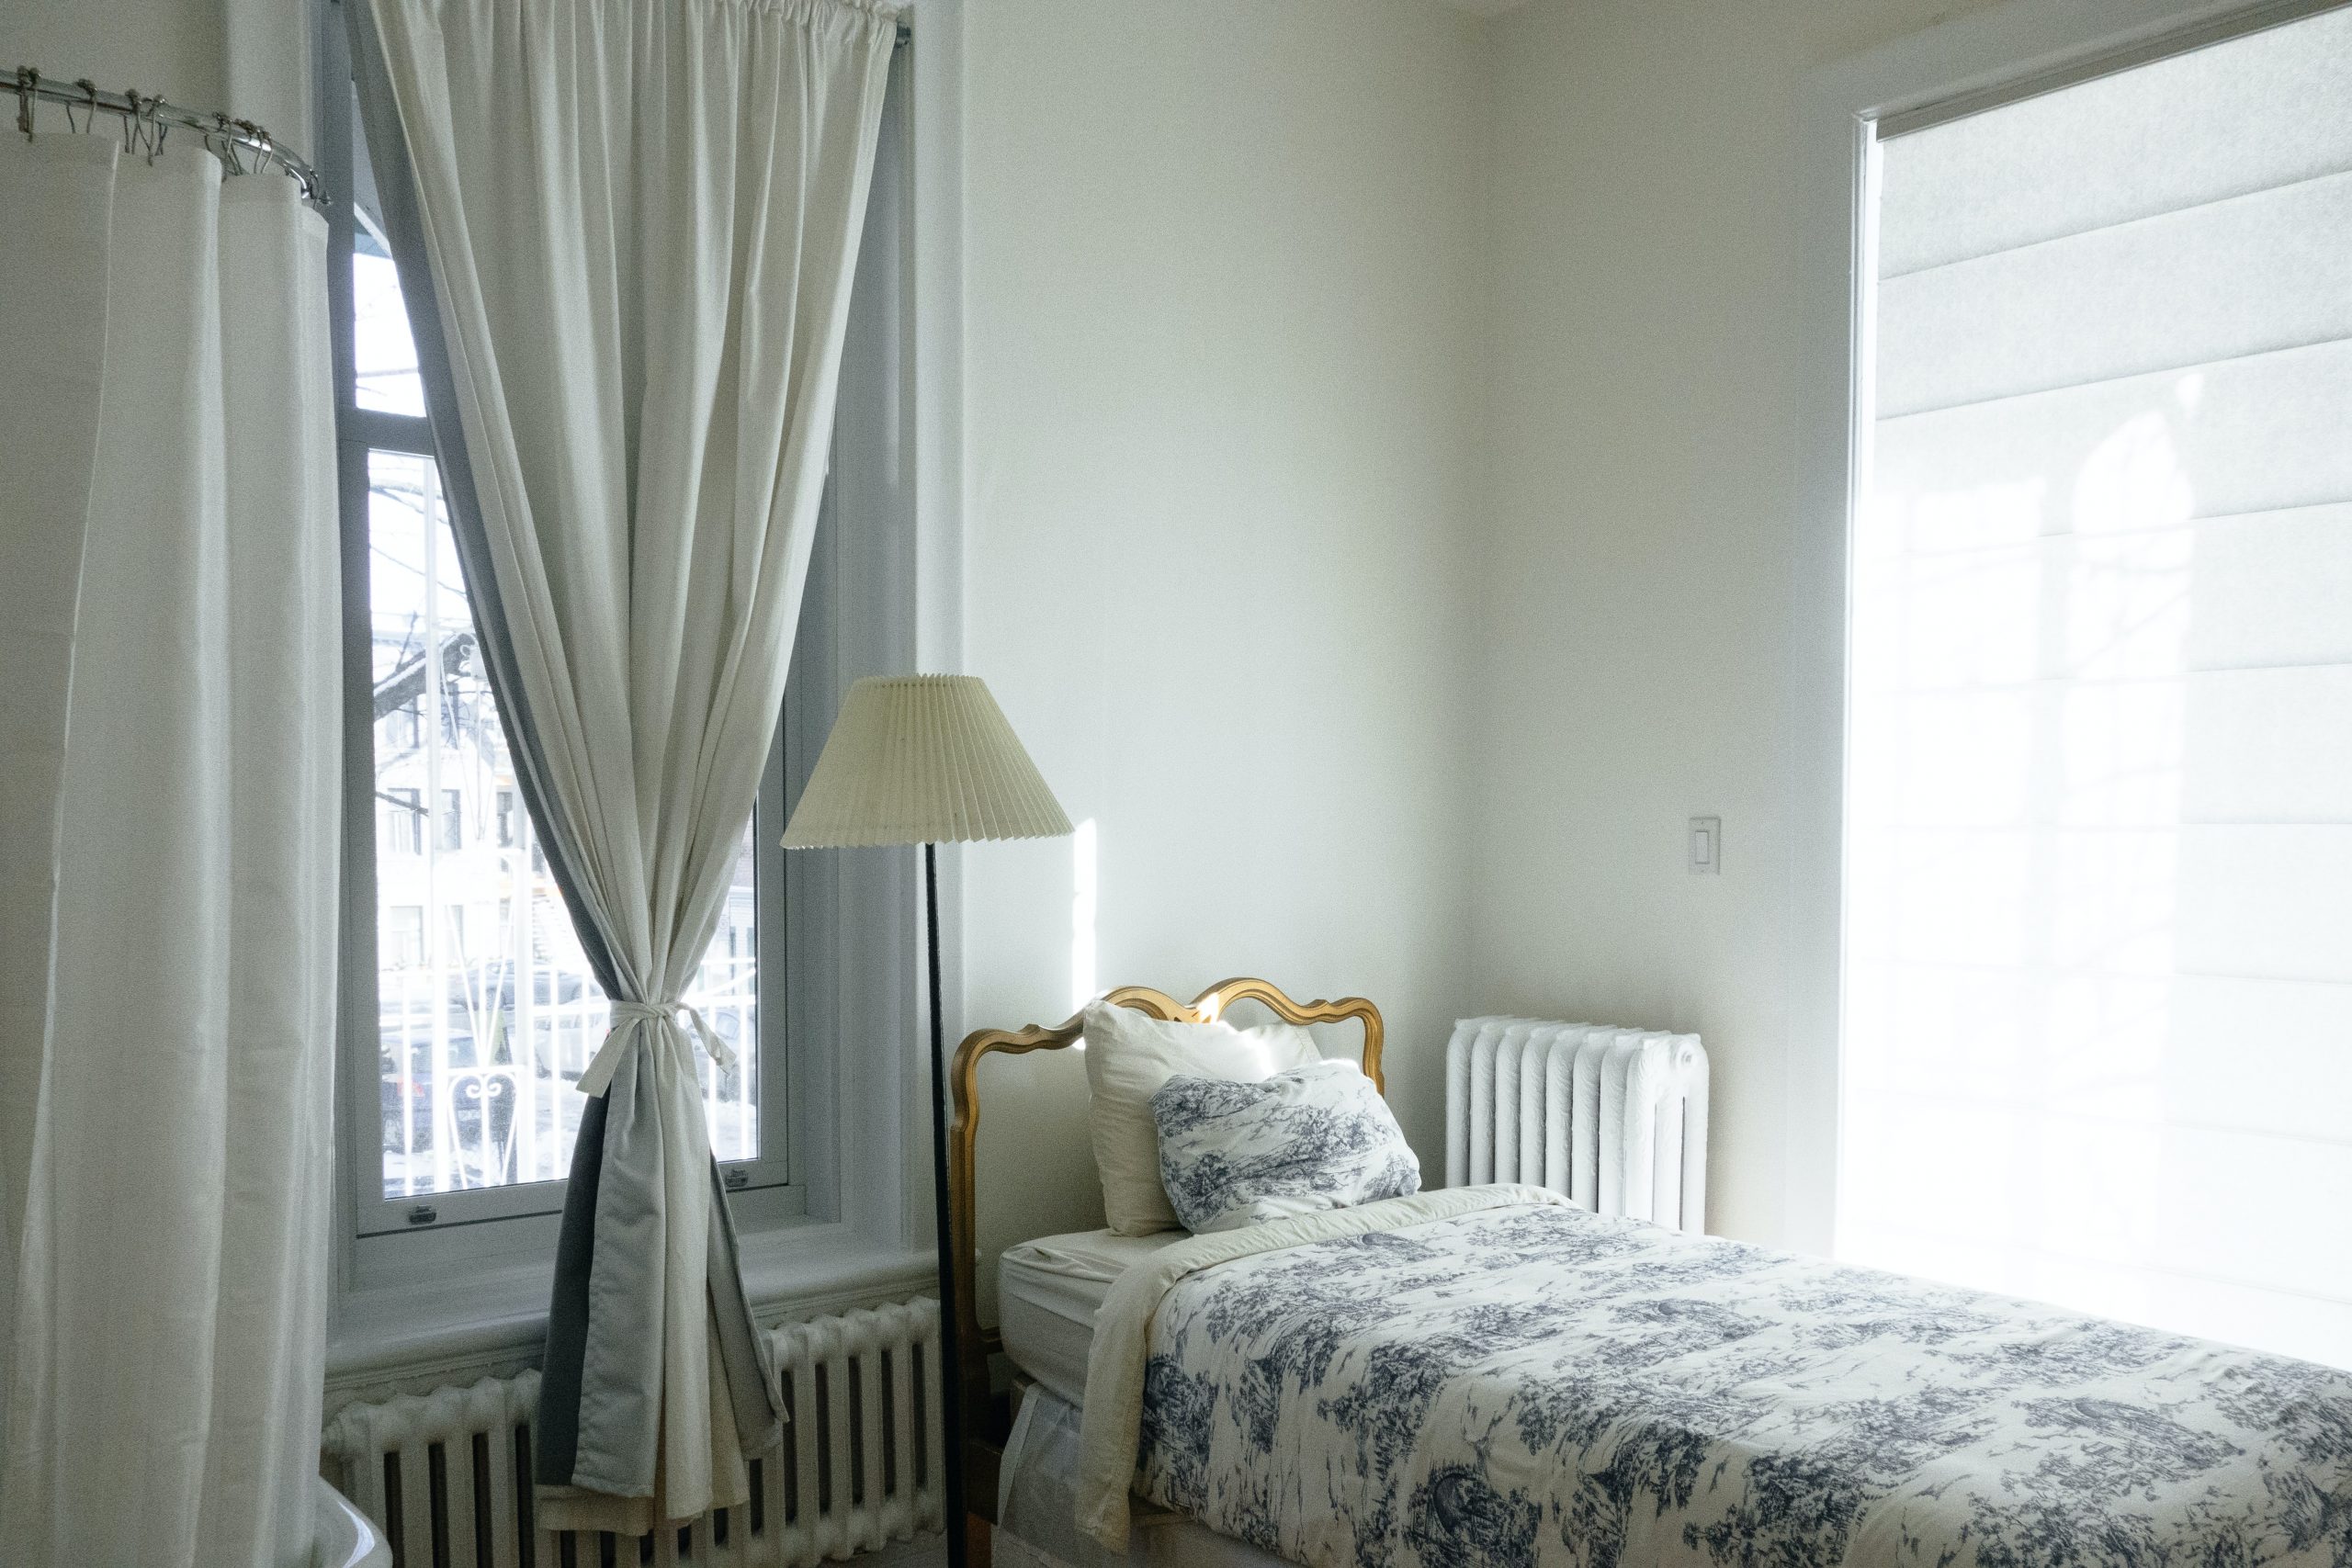 Types of fabric, or the perfect curtains for the bedroom